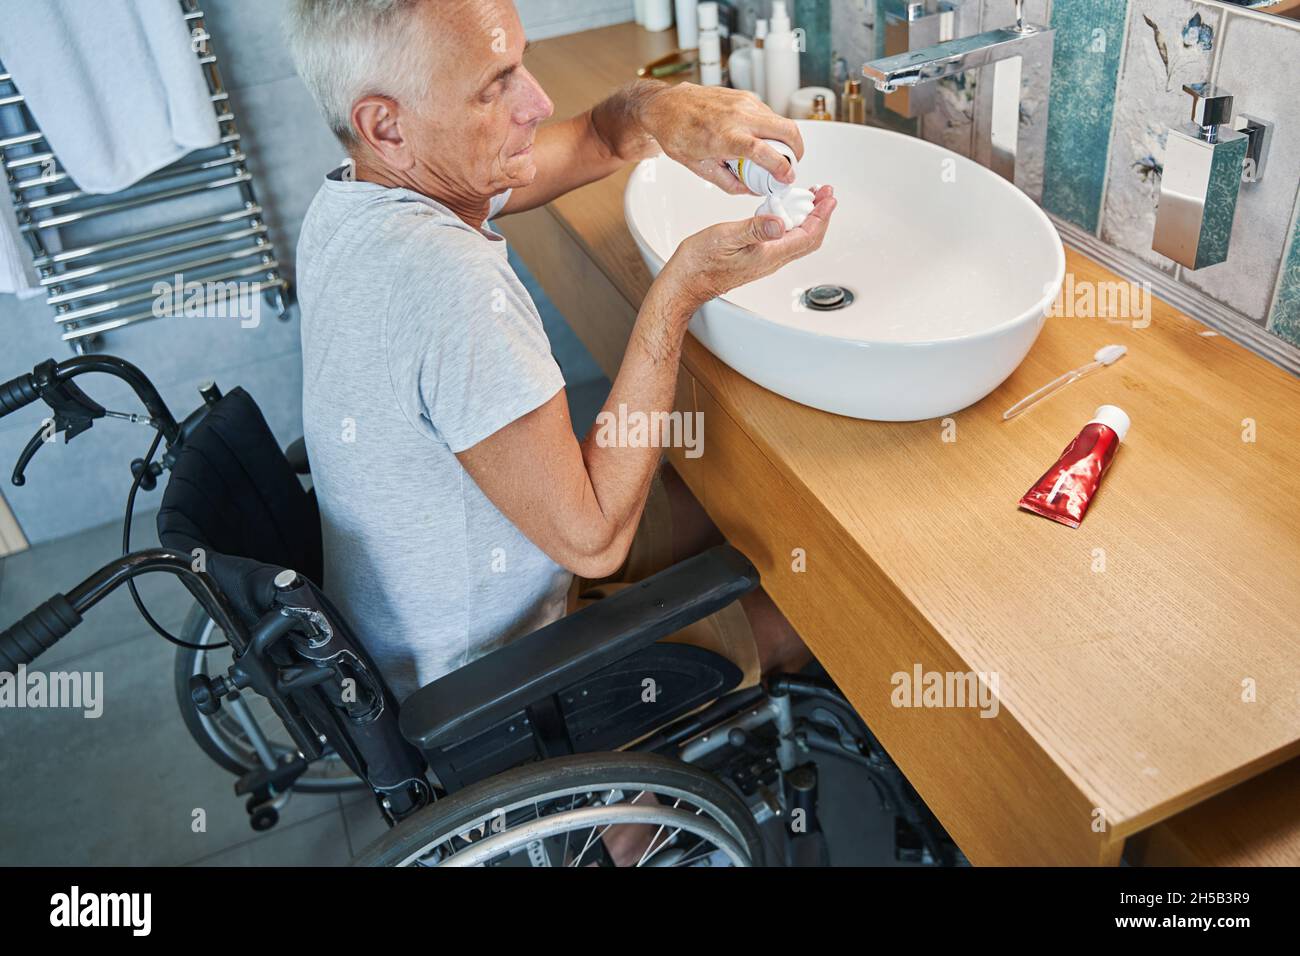 Male with disability pouring shaving cream on his palm Stock Photo